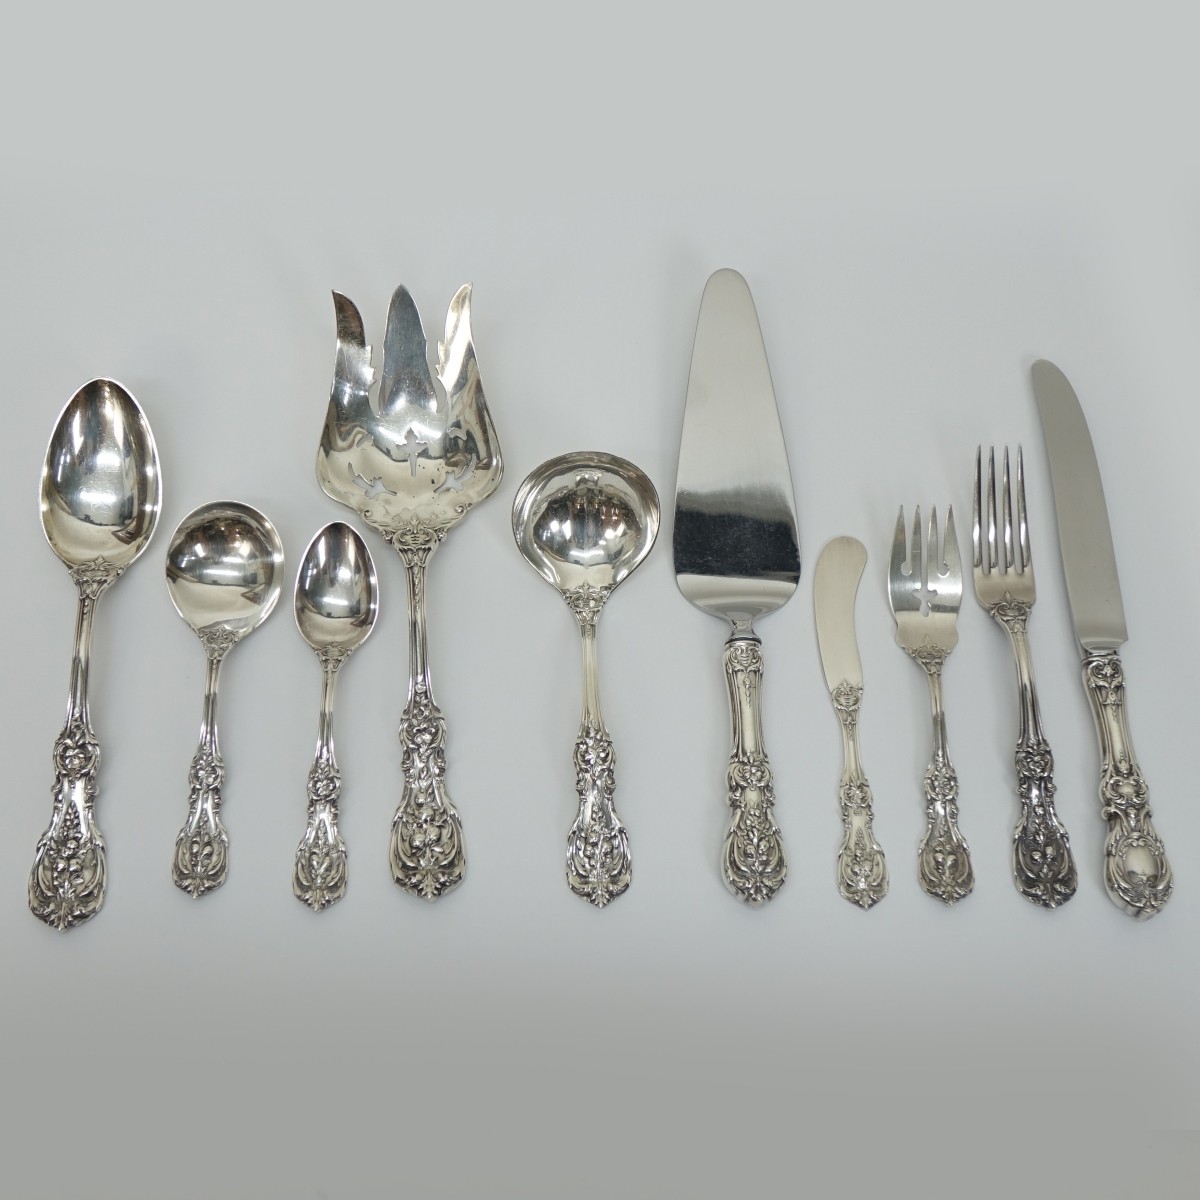 (87) Pc. Reed and Barton "Francis 1st" Flatware